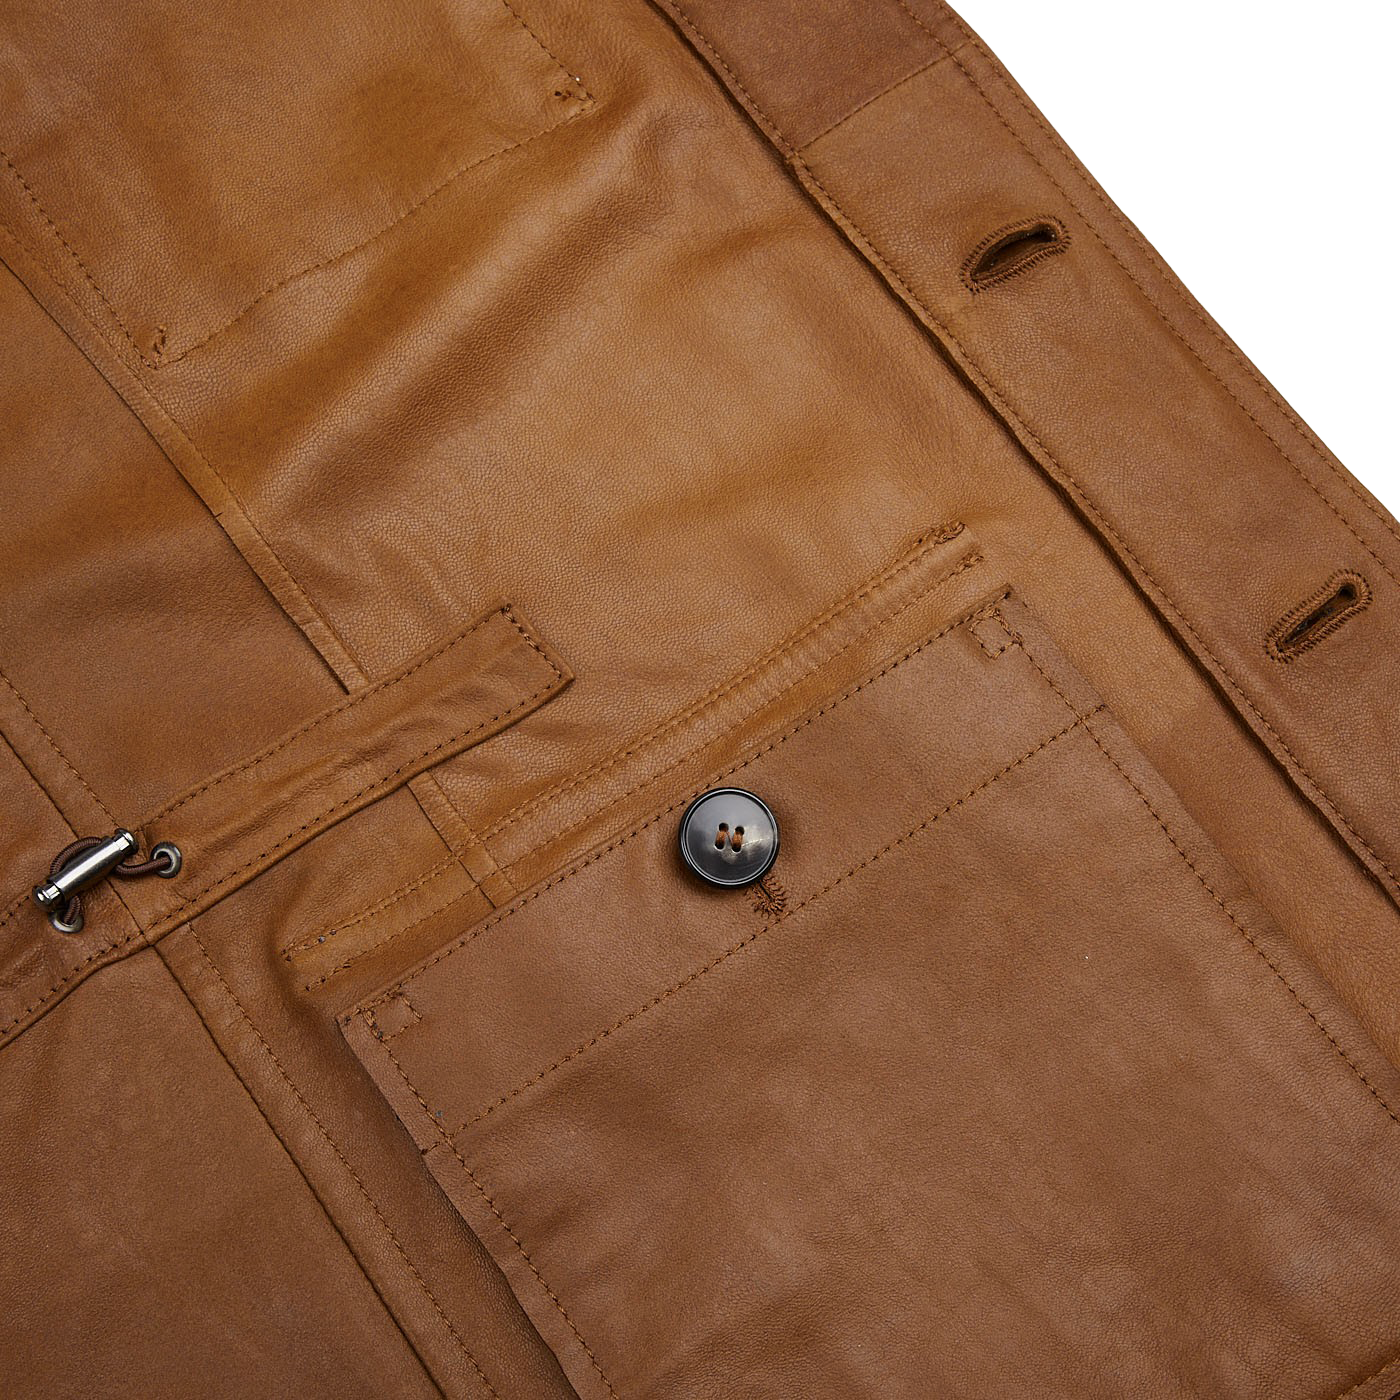 A close up of a Sandalwood Suede Leather Anton Jacket by Werner Christ, showcasing the intricate texture of the suede goatskin.